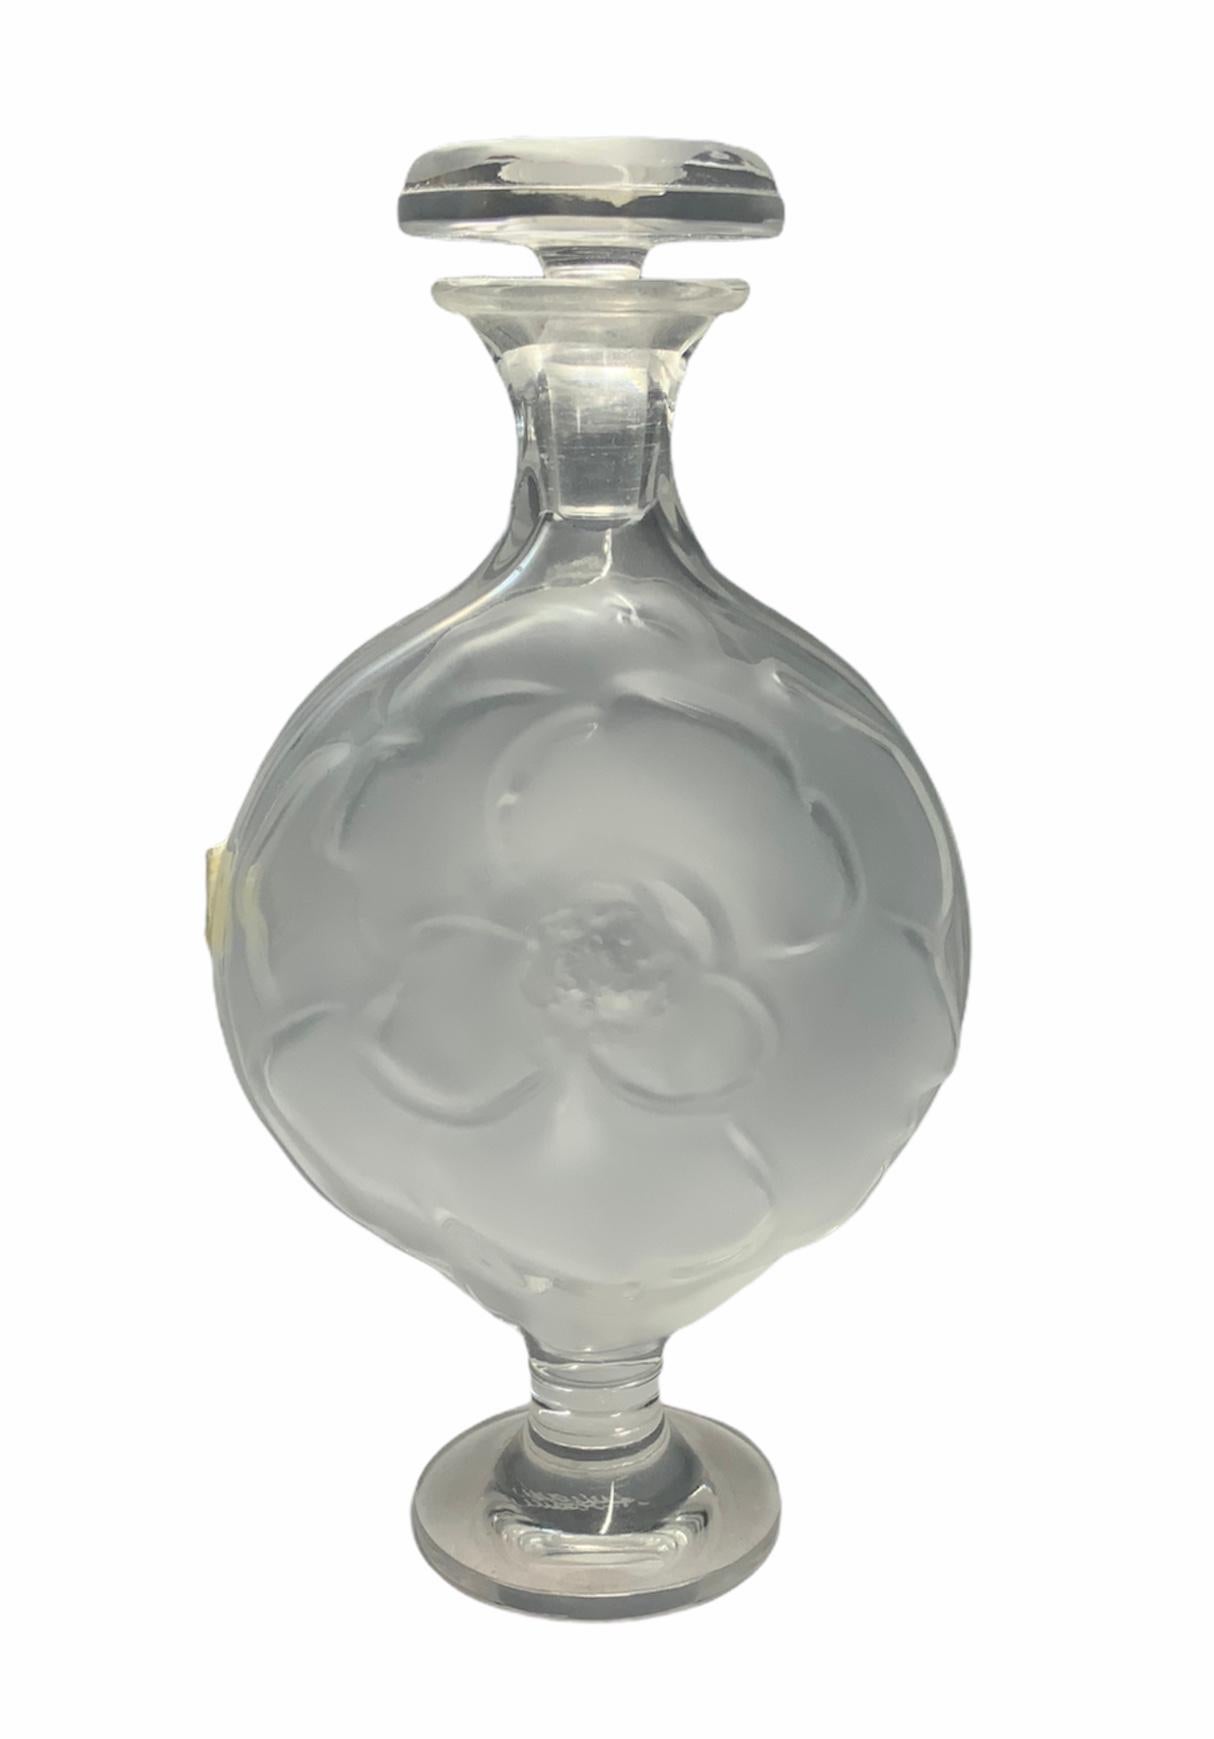 This is a Lalique glass perfume bottle shaped as a round flat urn. It is decorated with a frosted rose in one side and a camellia flower in the other side. The flat round shaped stopper is also decorated with a frosted camellia. Under the base is